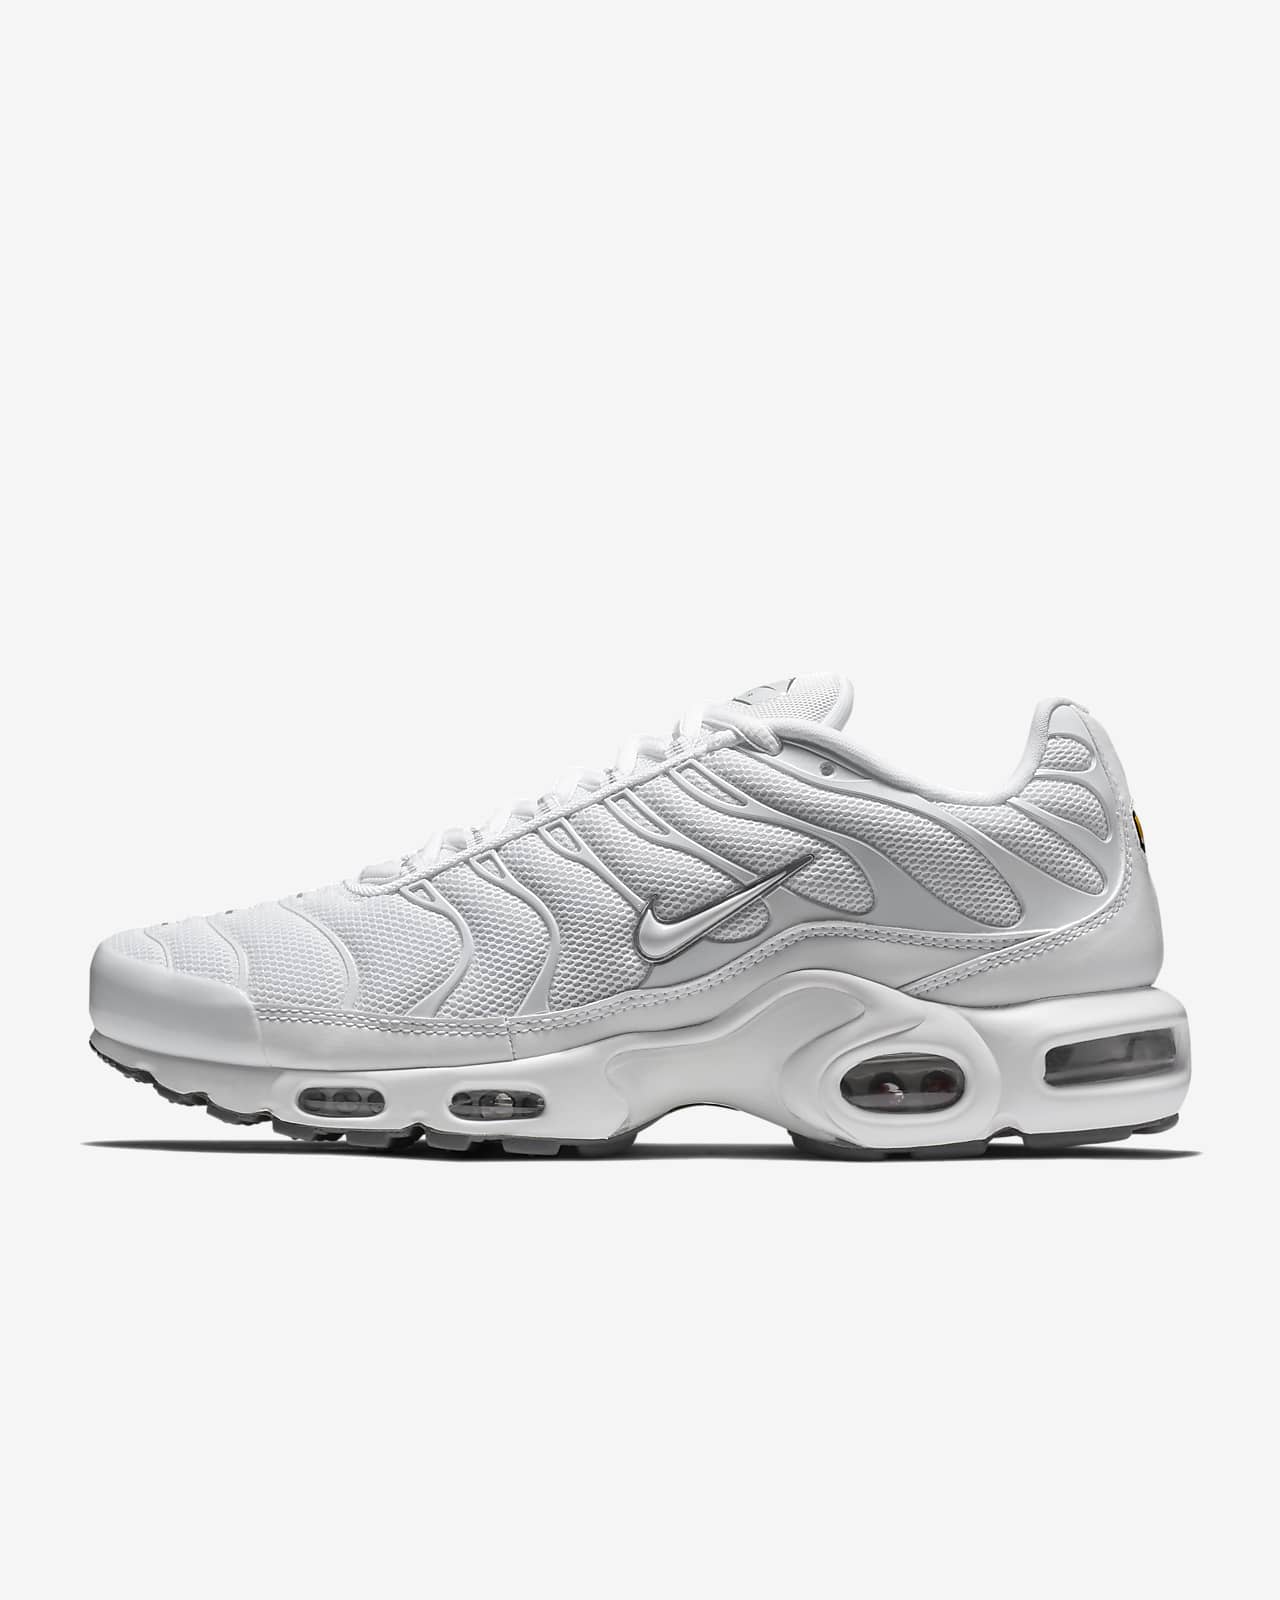 today Scrutiny Outflow Nike Air Max Plus Men's Shoes. Nike.com